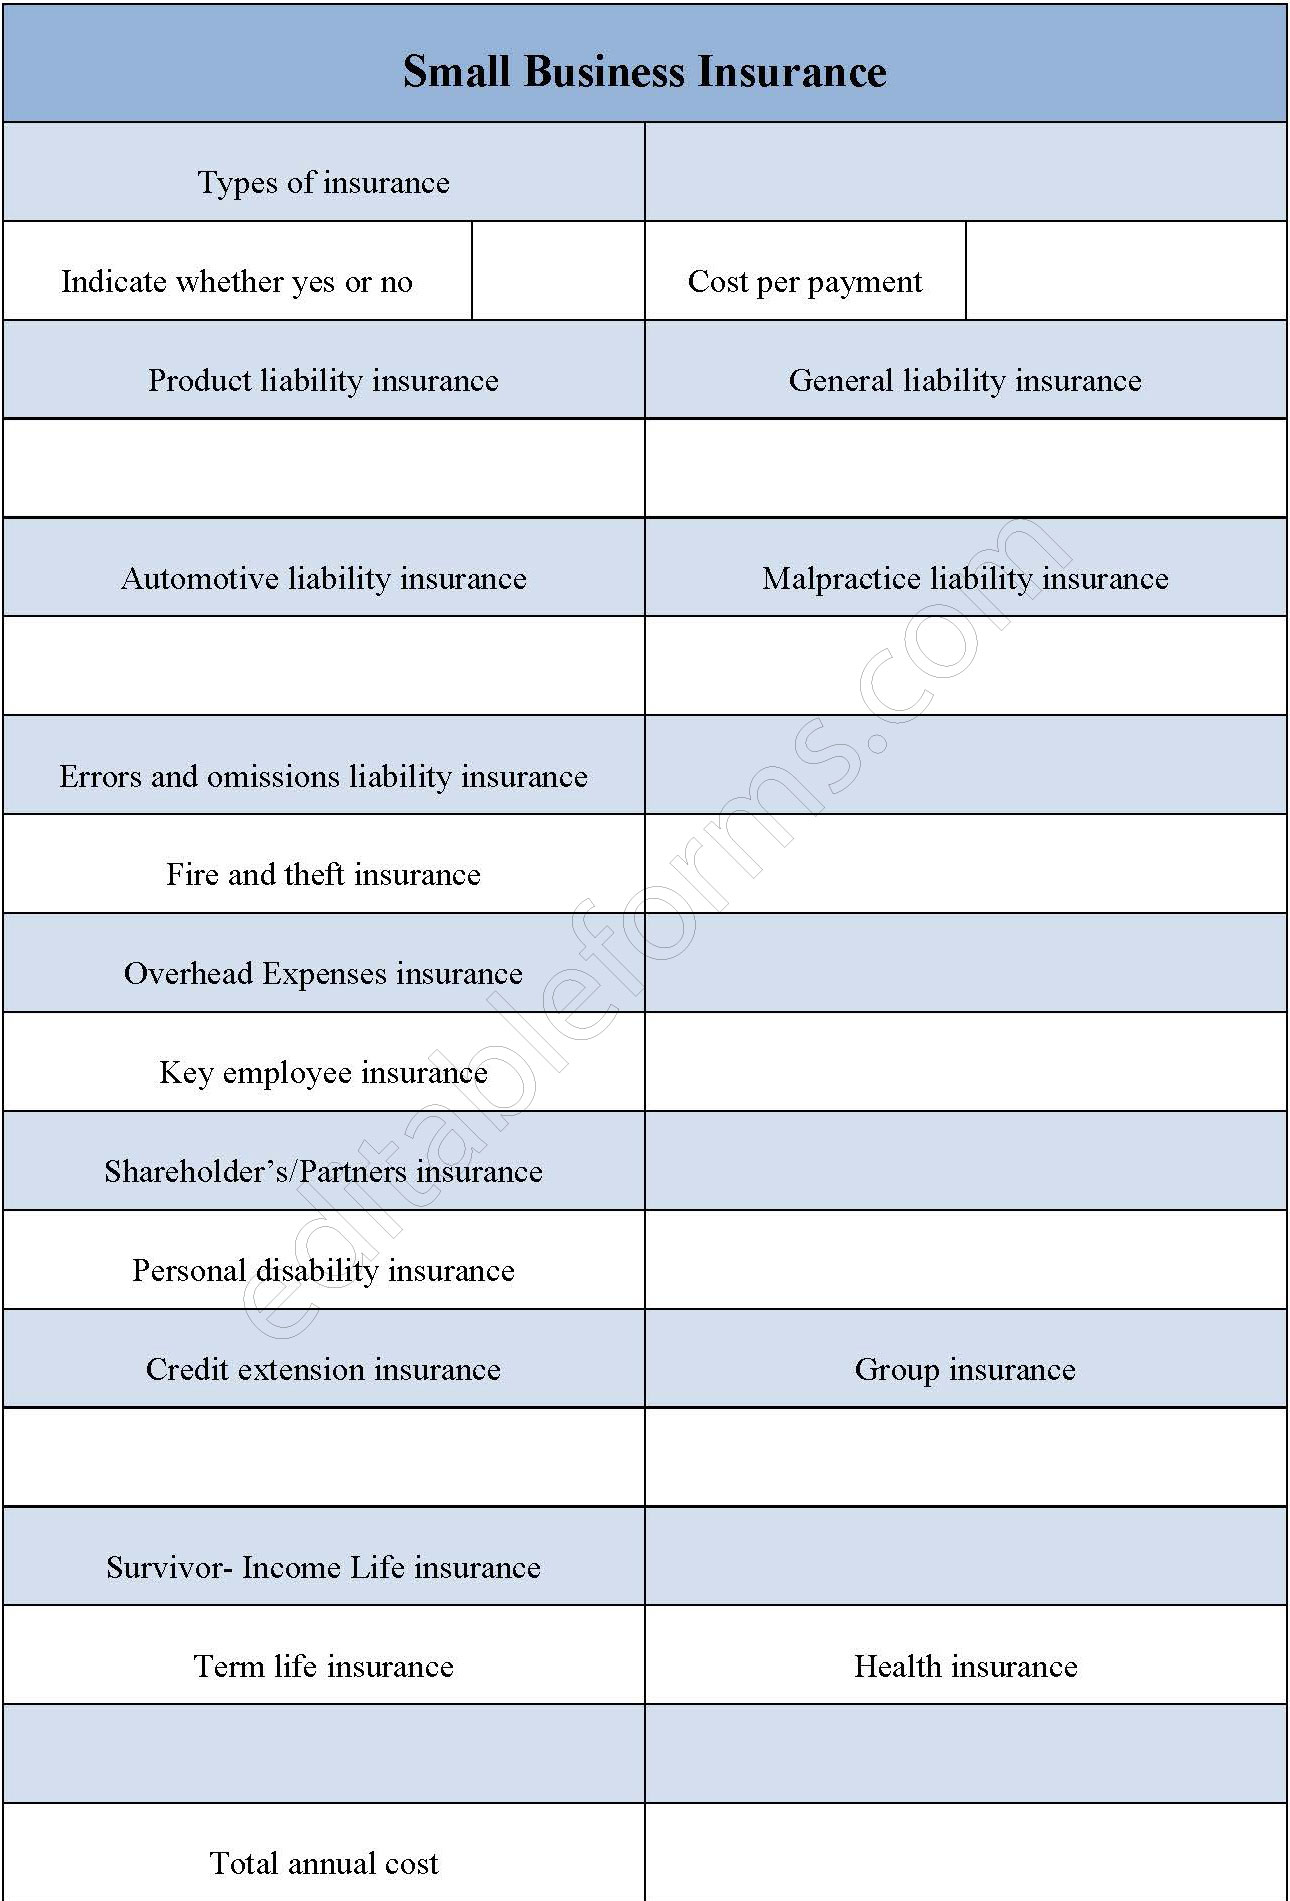 Small Business Insurance Form